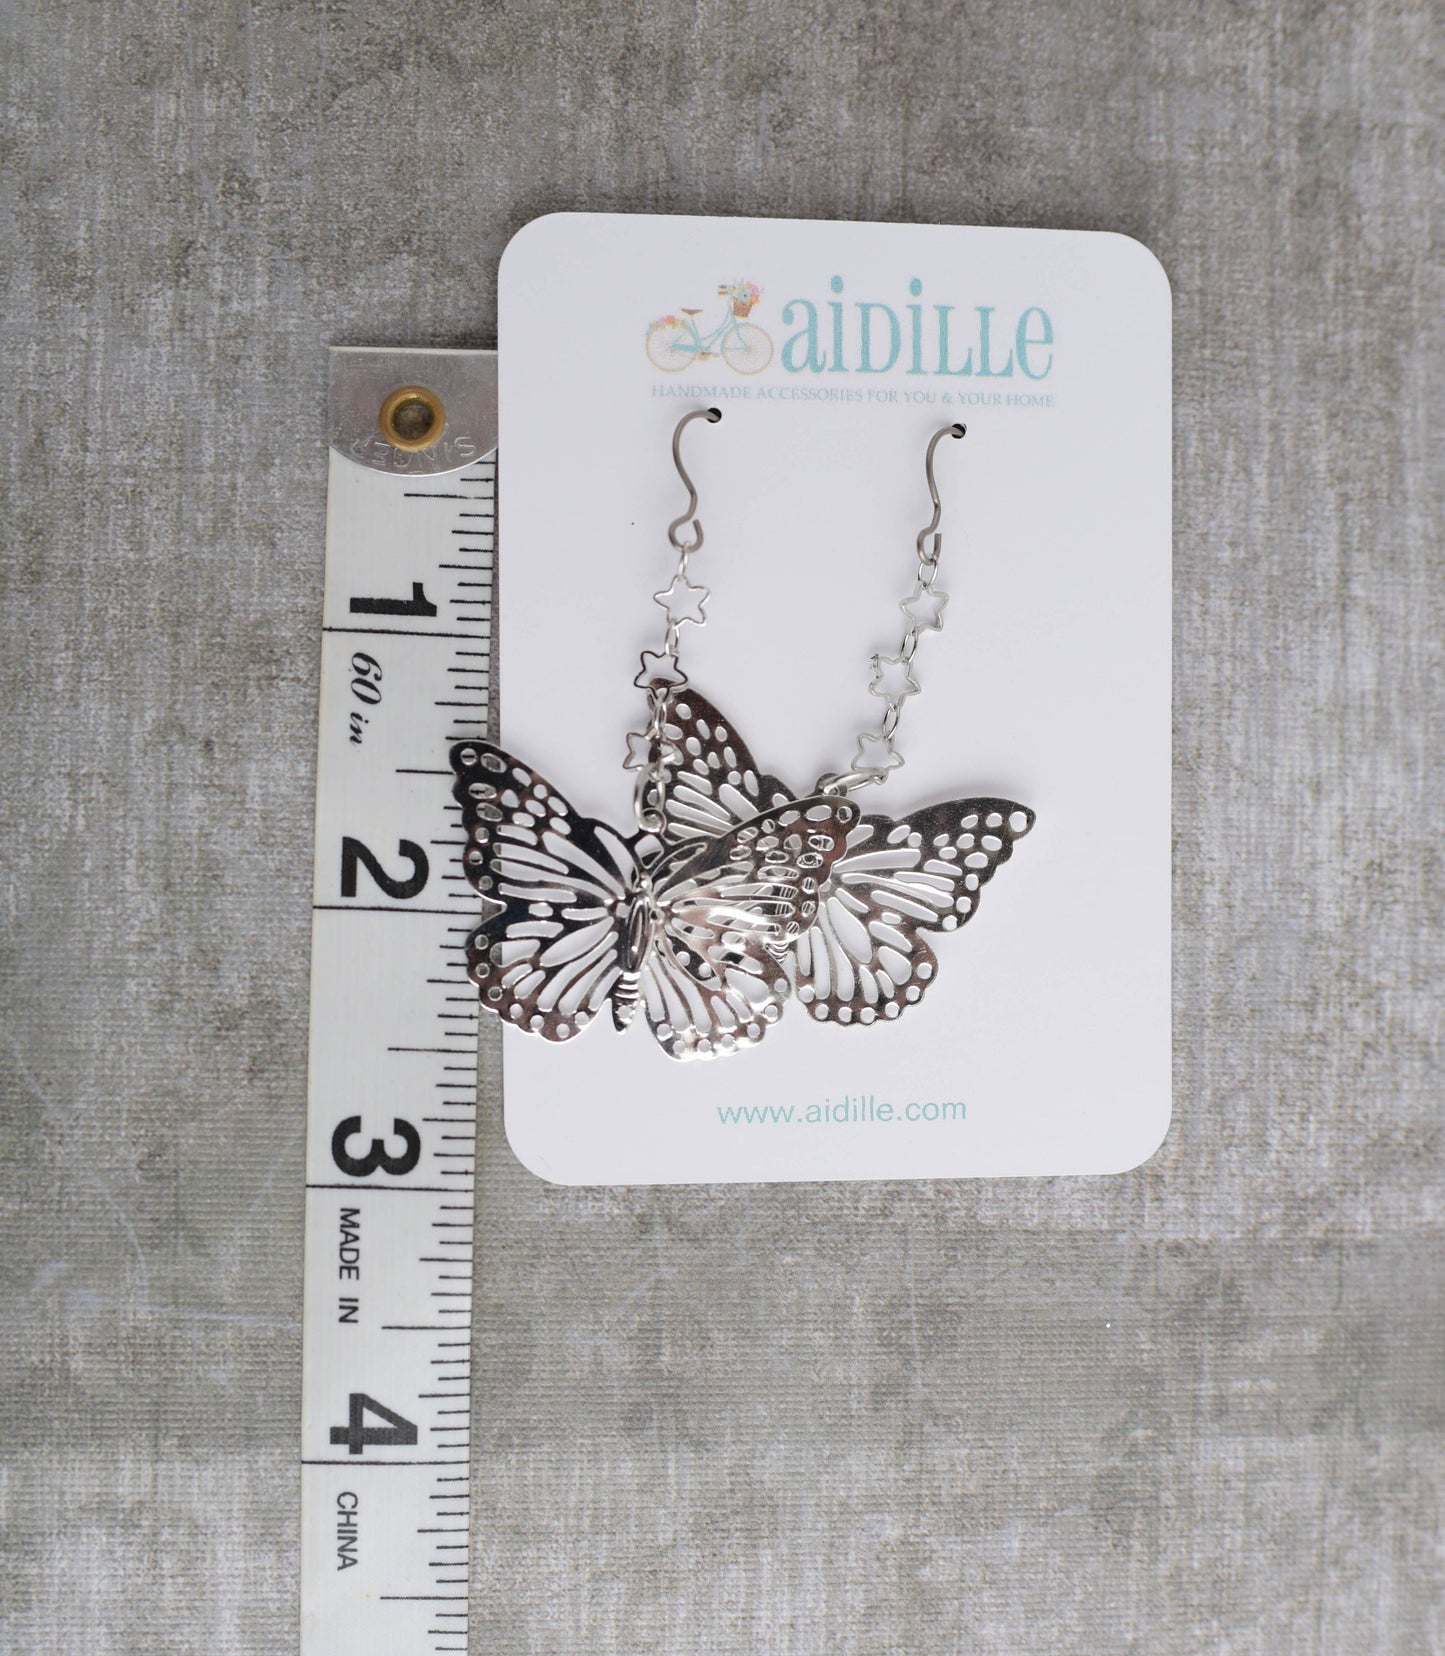 Long Silver Filigree Butterfly Dangle Earrings with Titanium Ear Wires